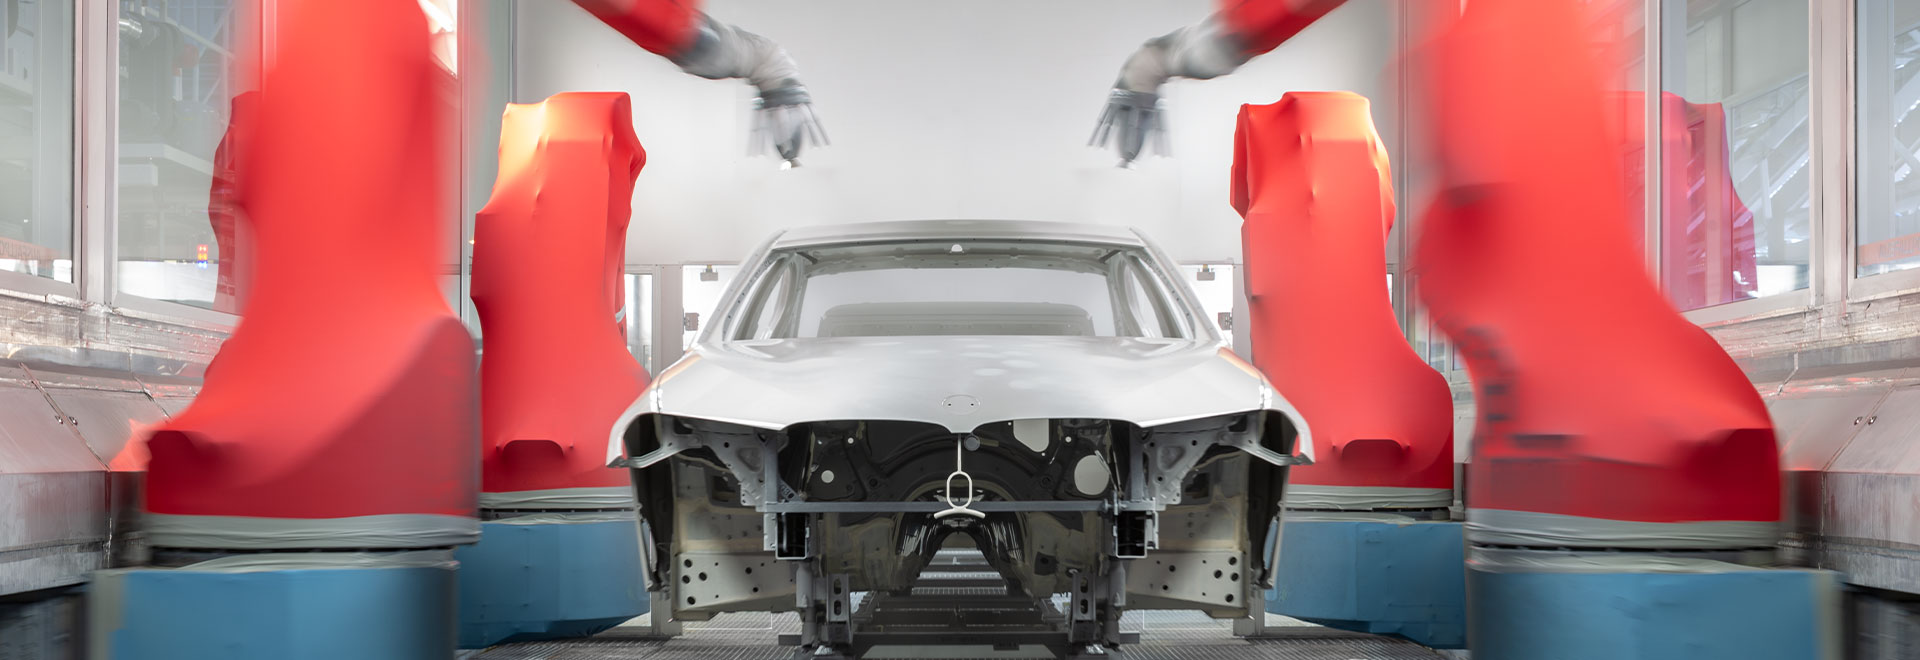 Paint shop in the automotive industry